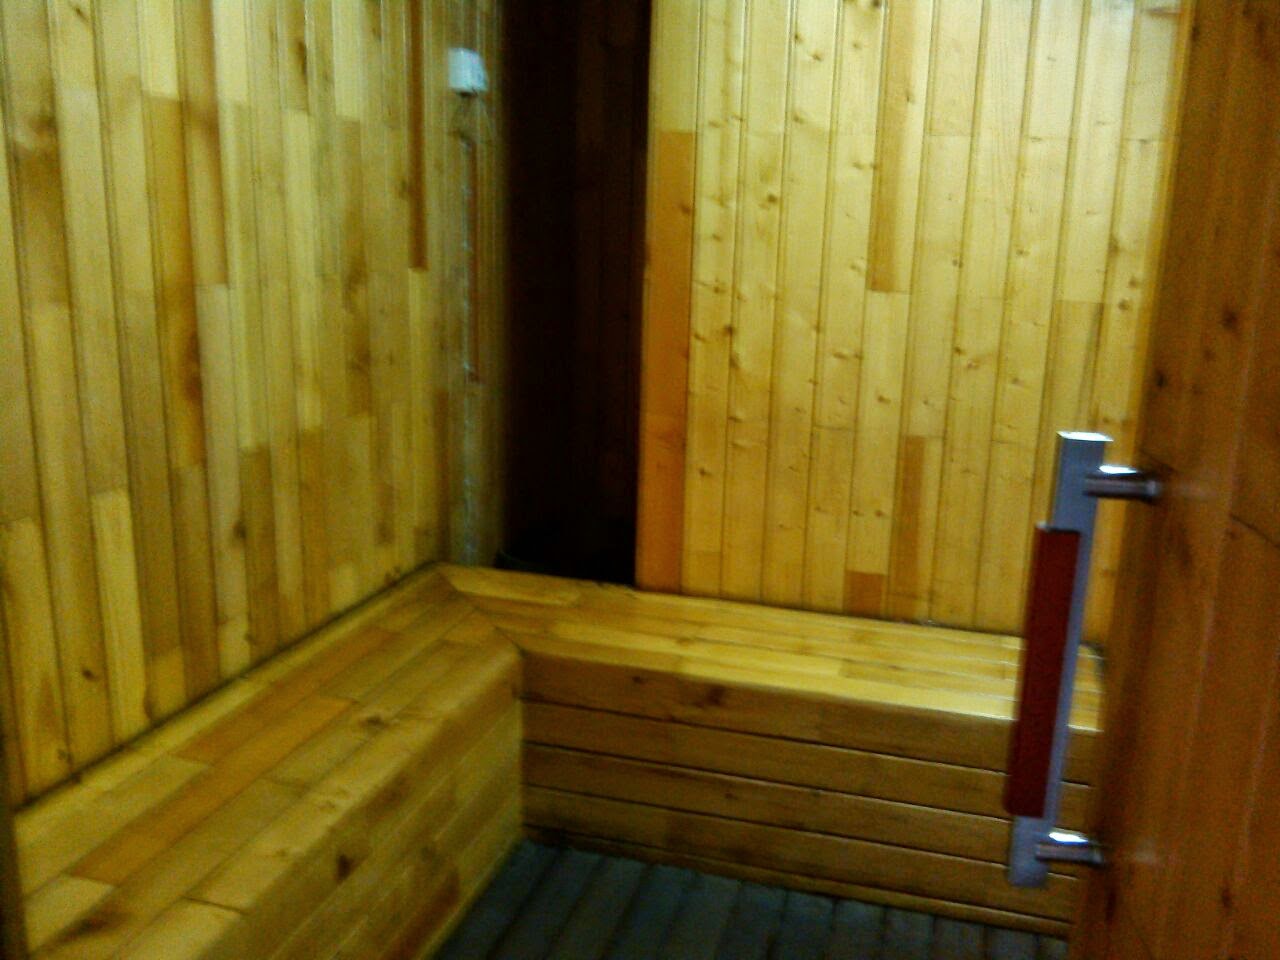  How To Use Sauna At La Fitness for Weight Loss